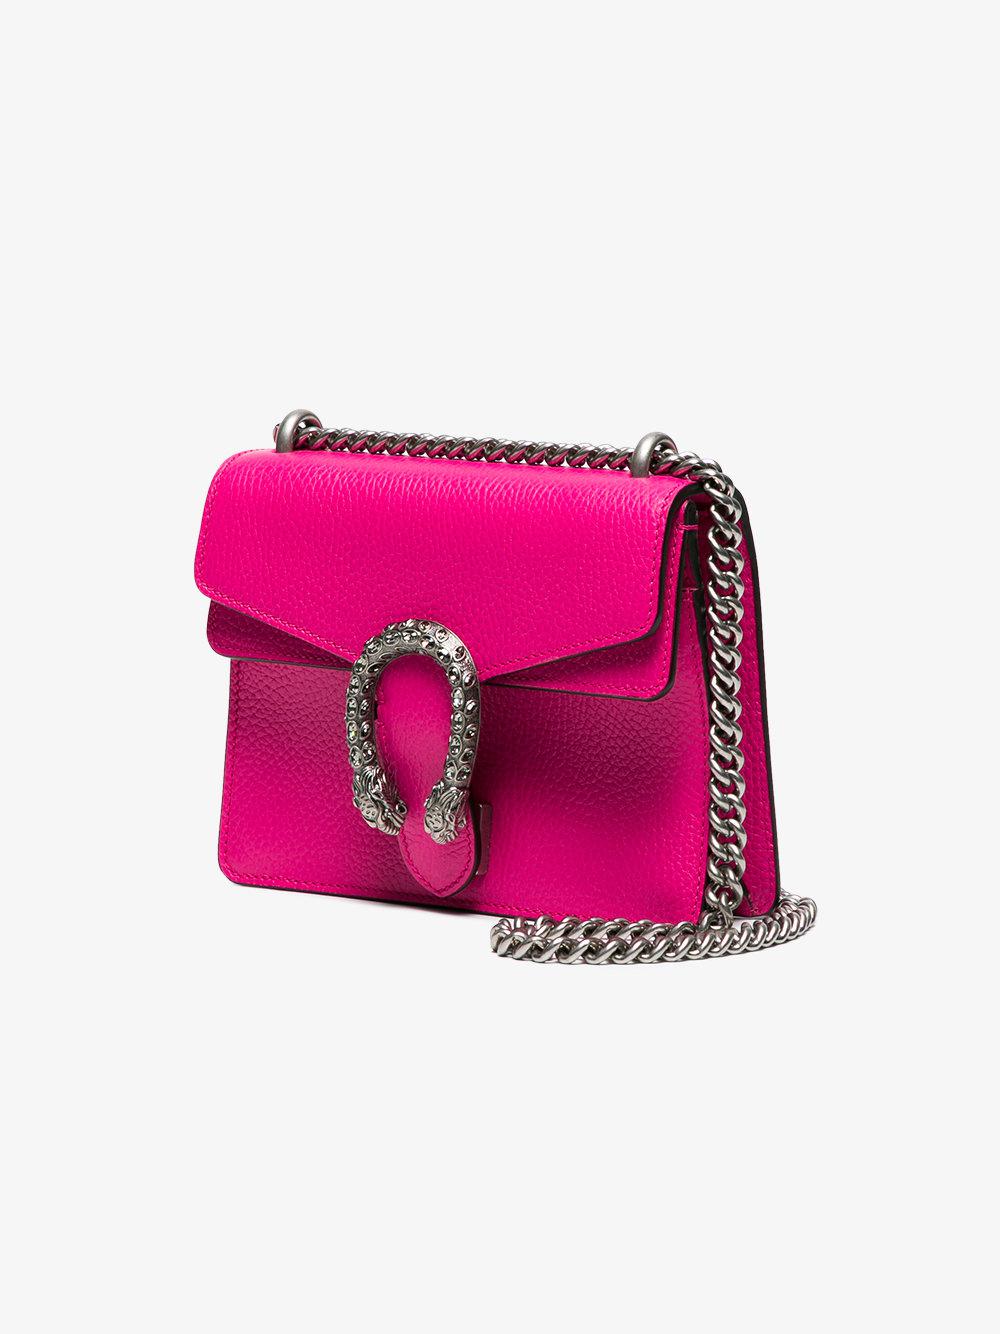 Gucci Dionysus Leather Shoulder Bag With Strass in Violet (Purple) - Lyst